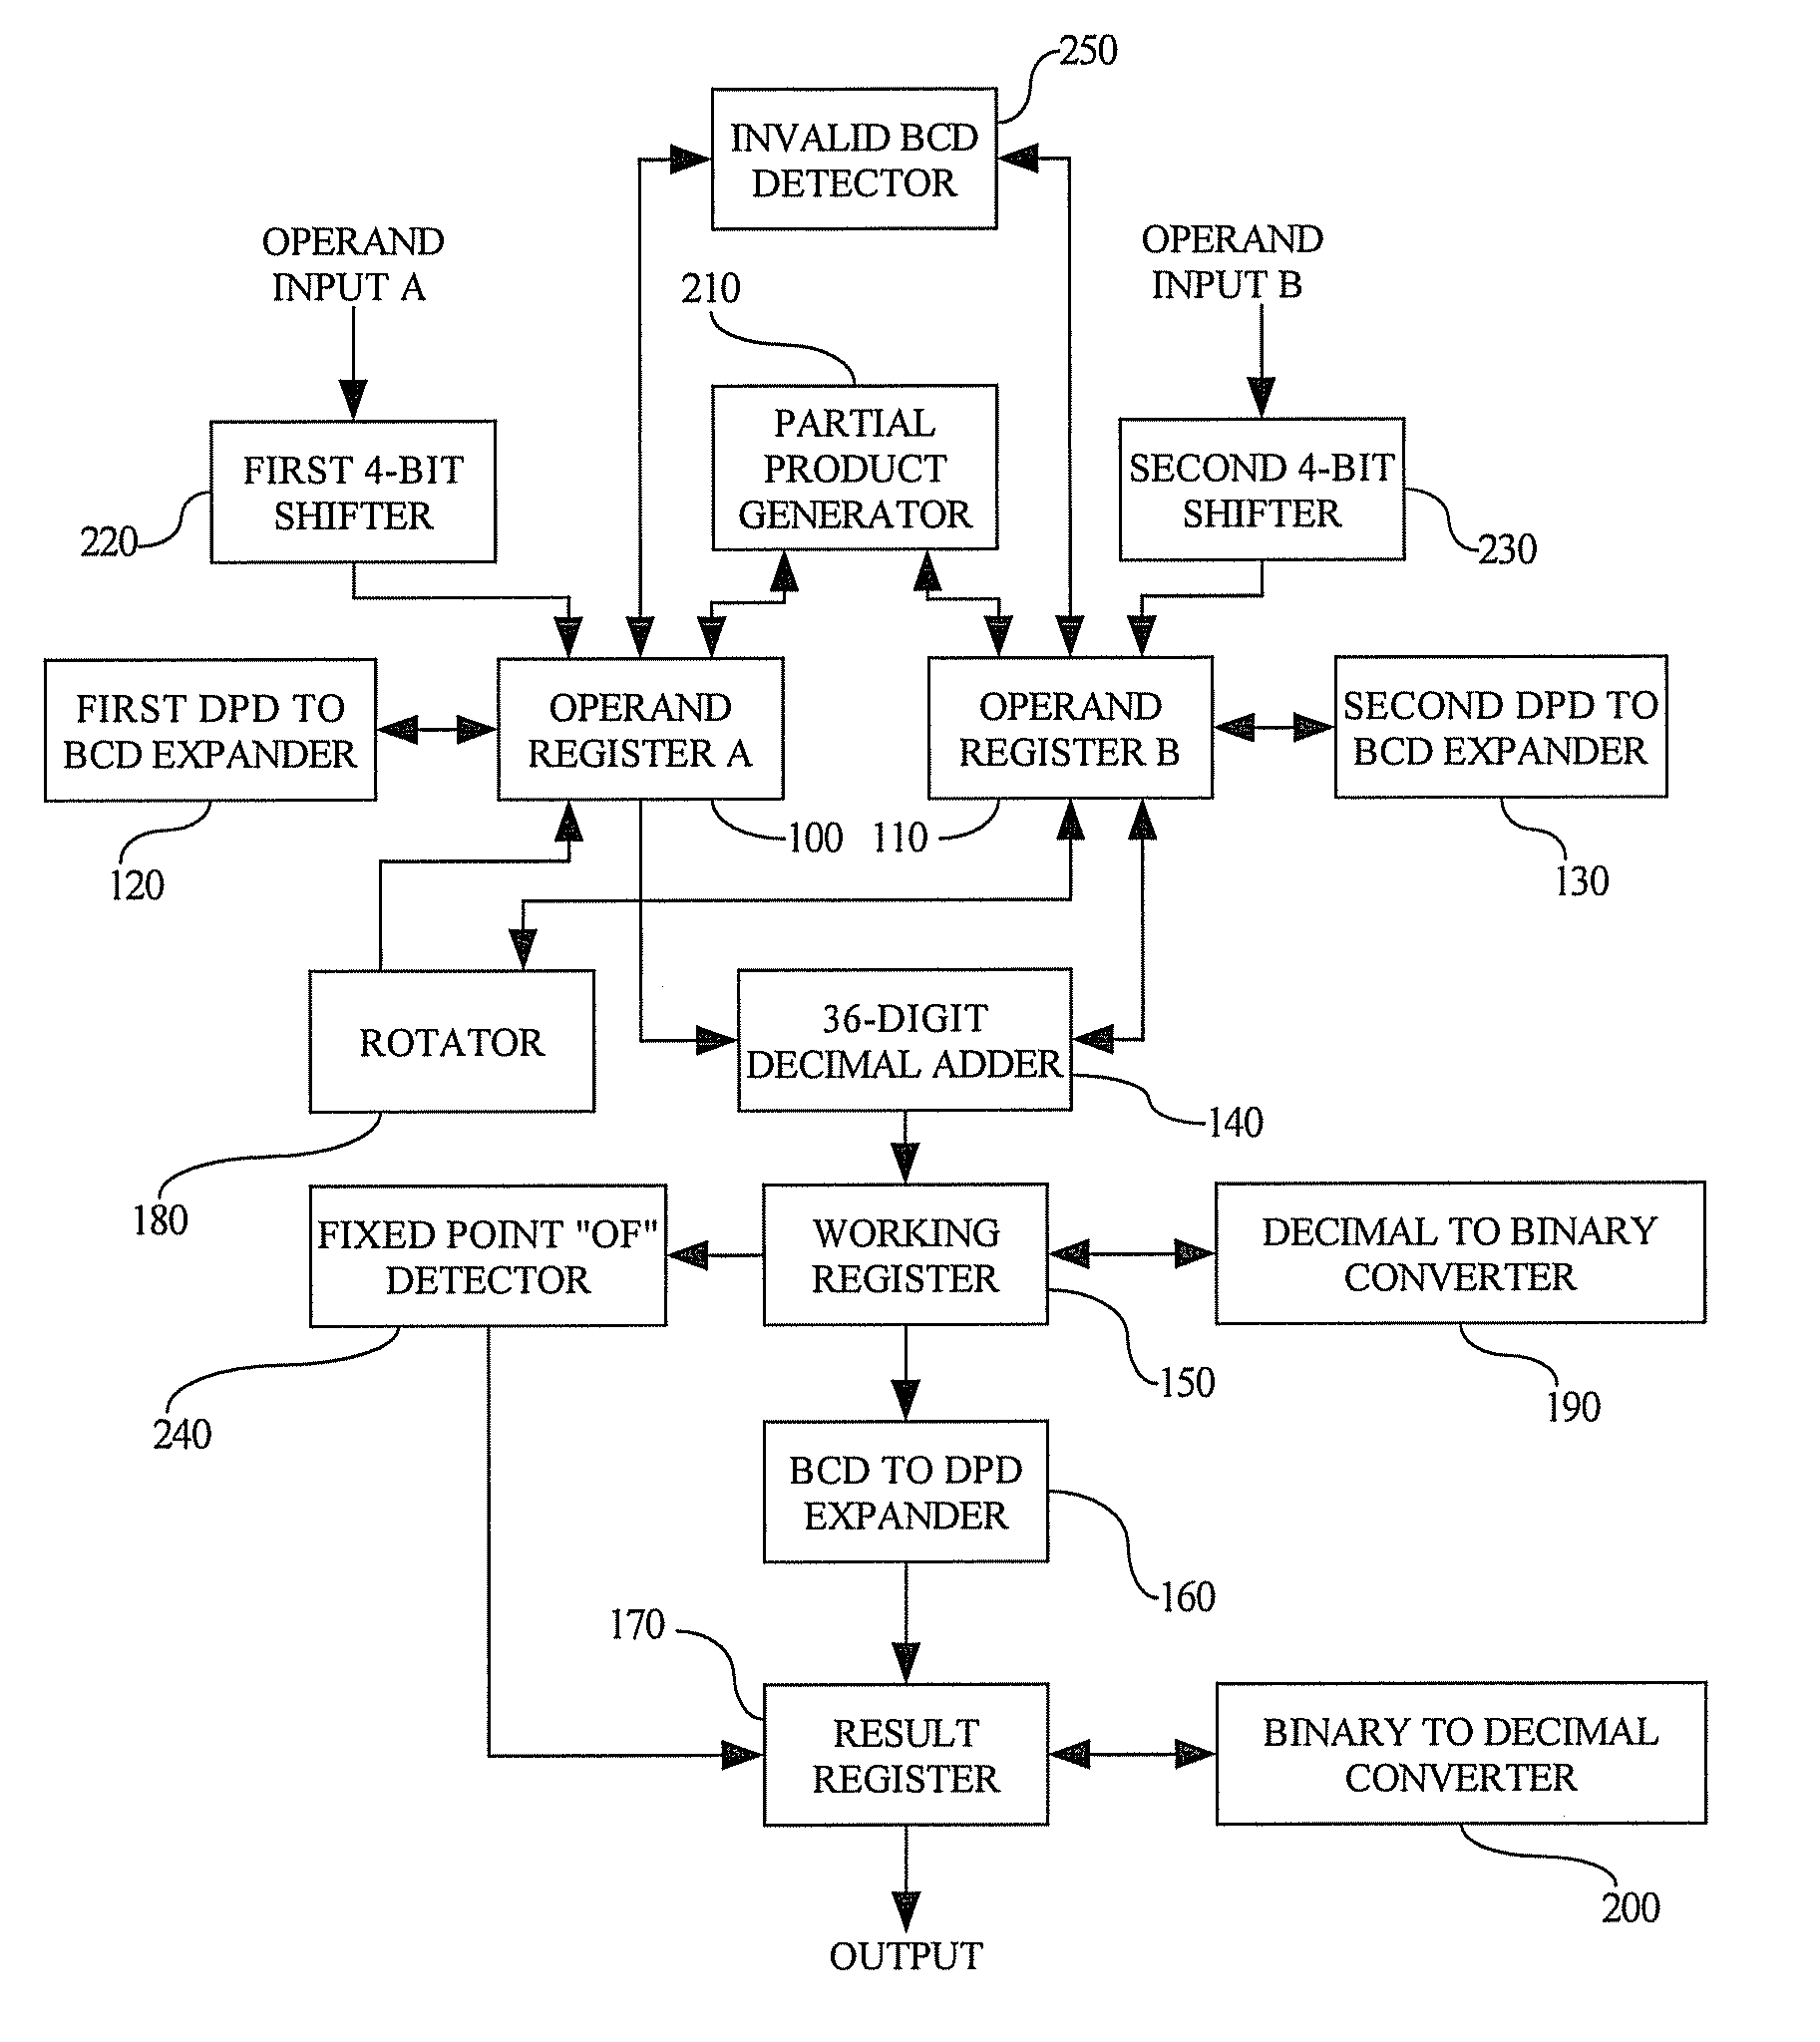 Execution of fixed point instructions using a decimal floating point unit